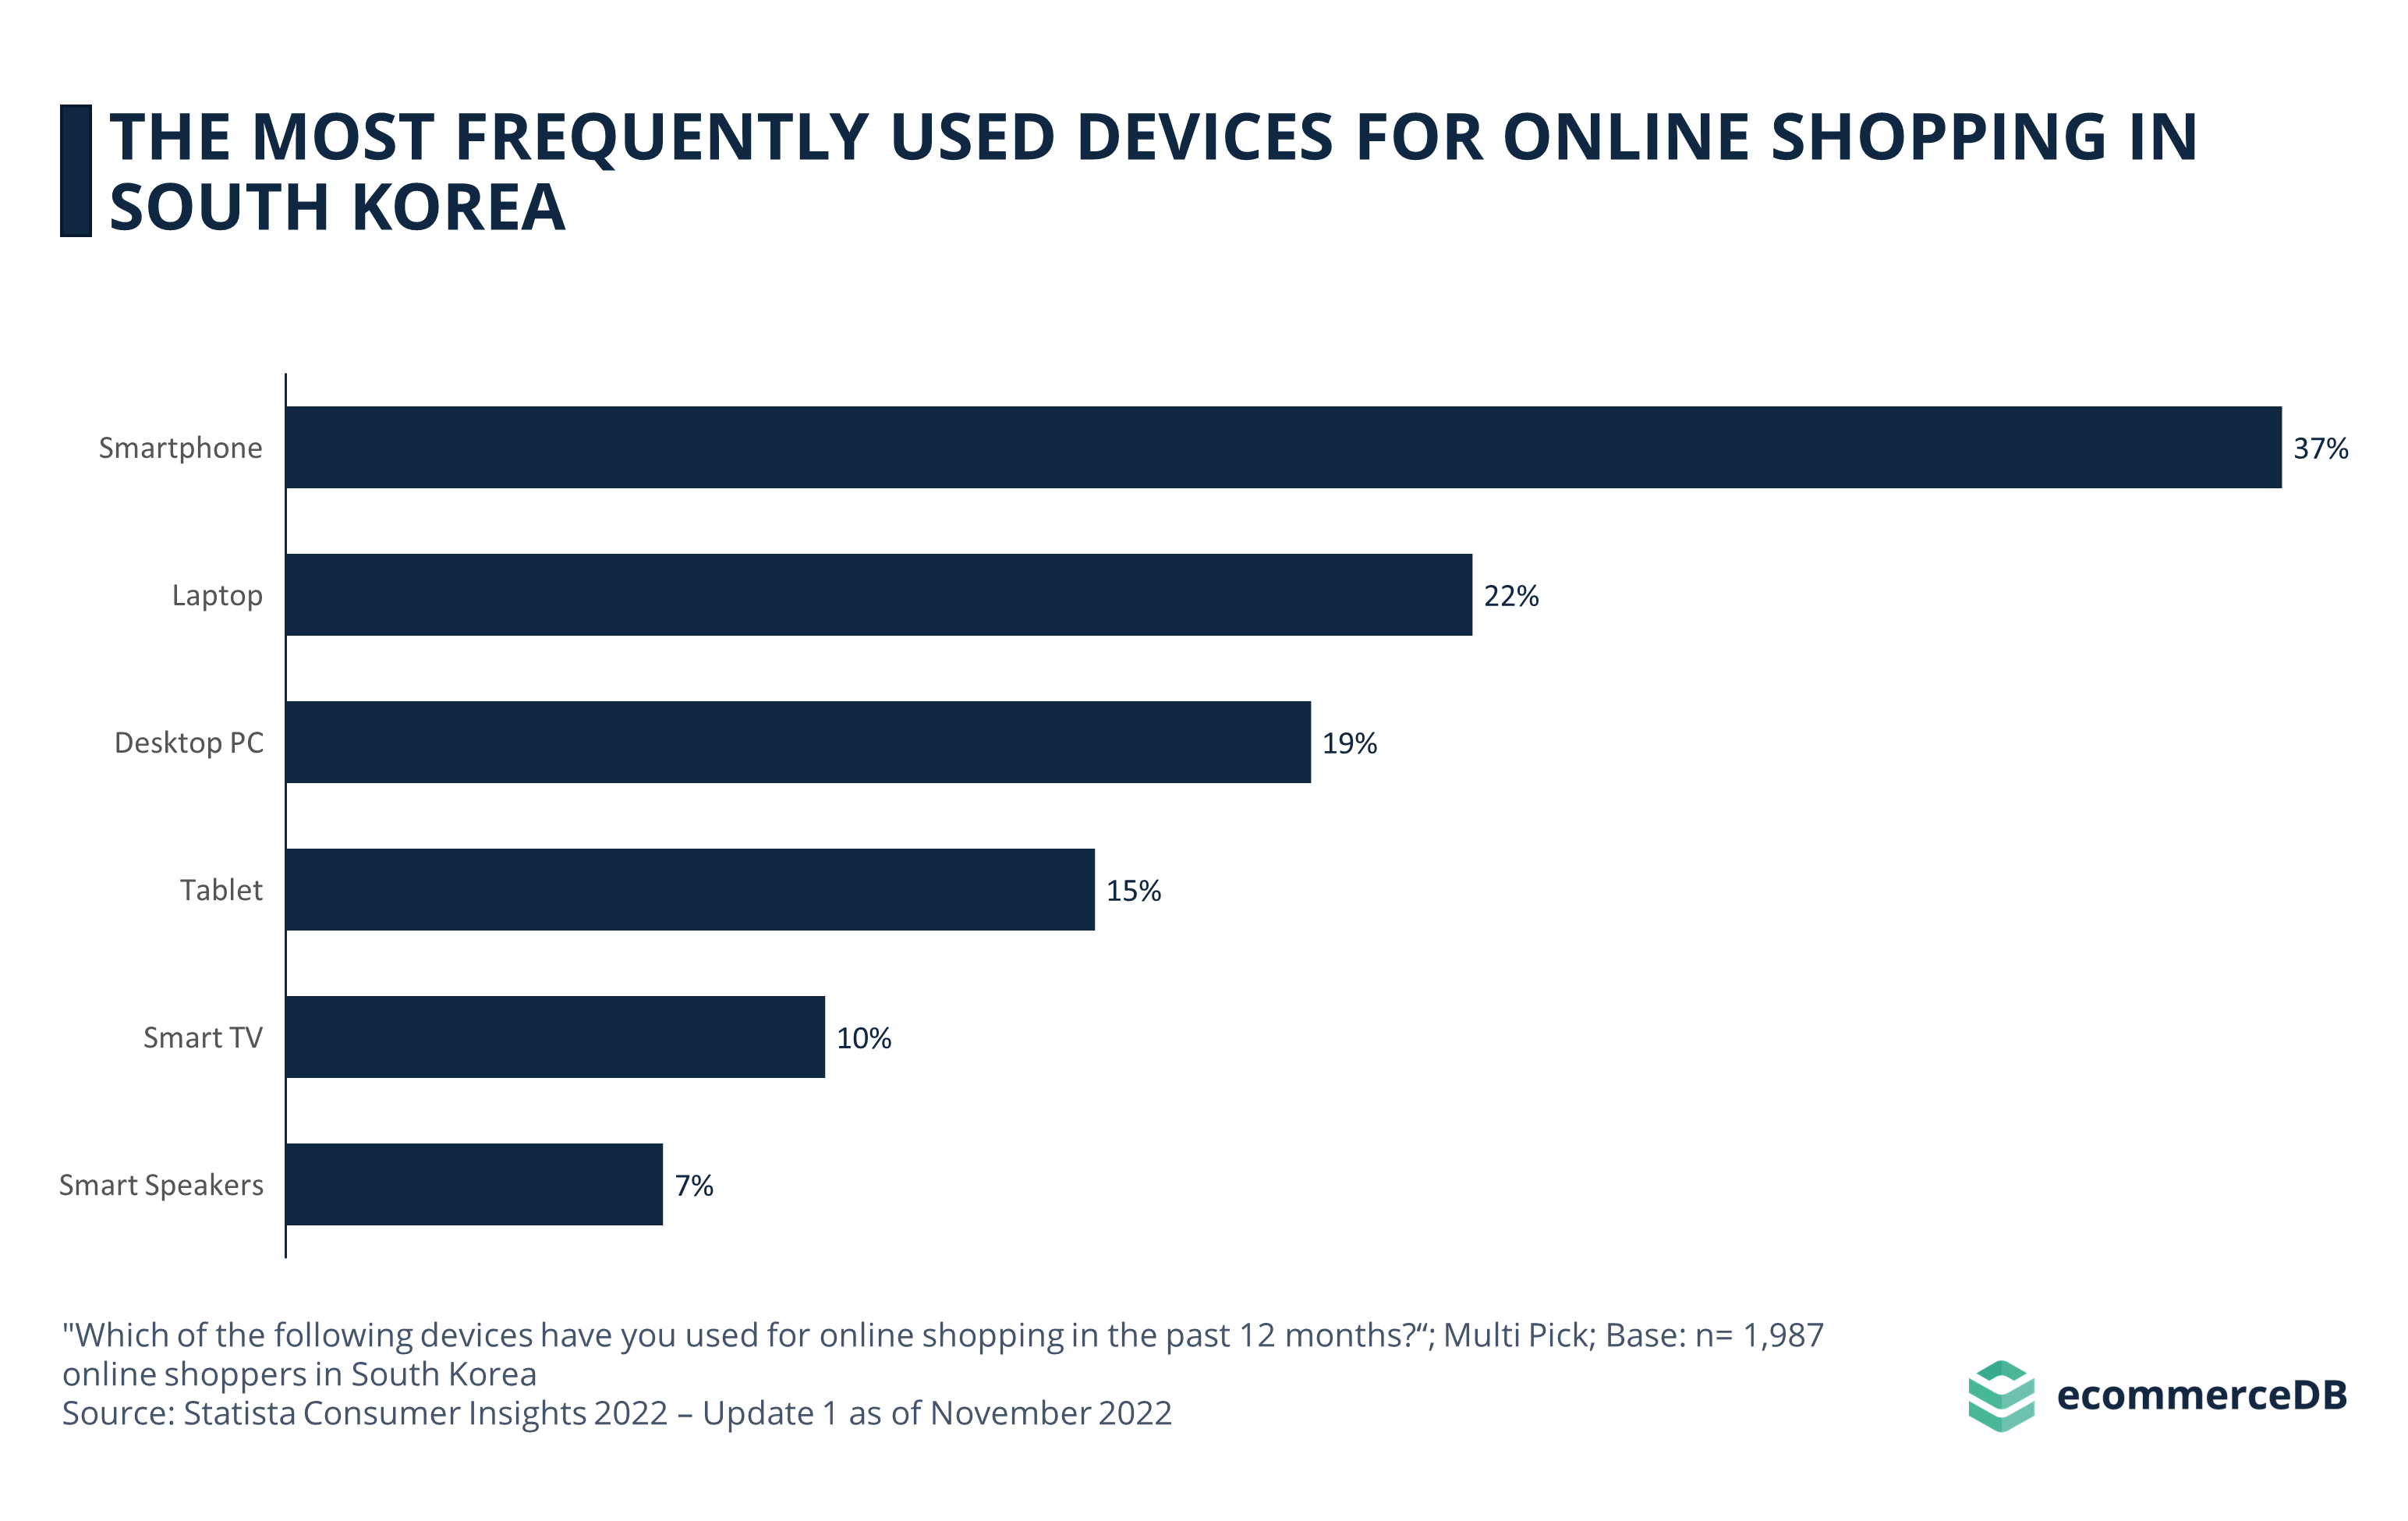 The Most Frequently Used Devices for Online Shopping in South Korea